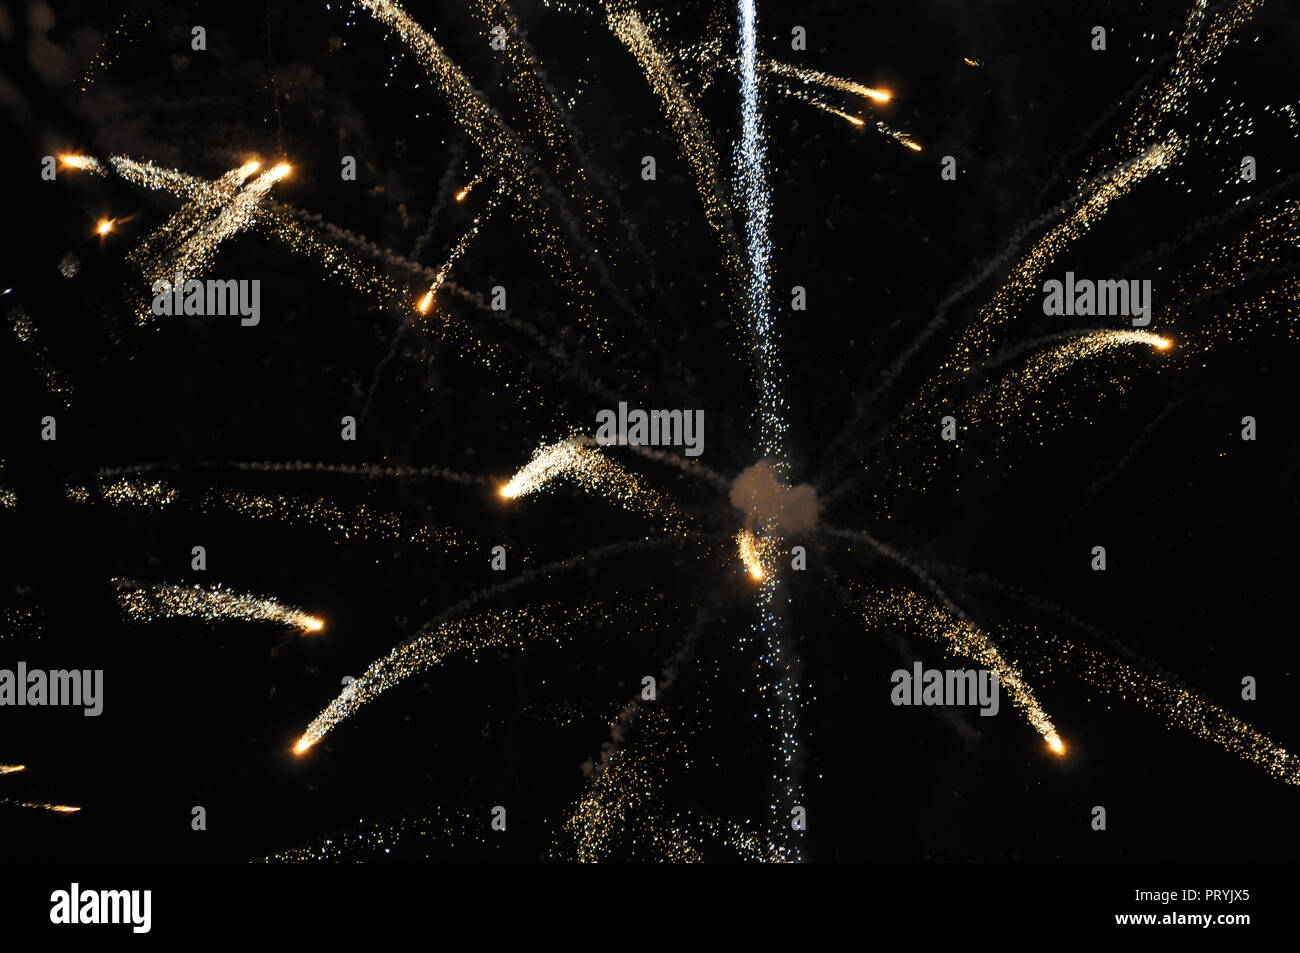 Golden Fireworks at New Years Eve in Thailand Stock Photo